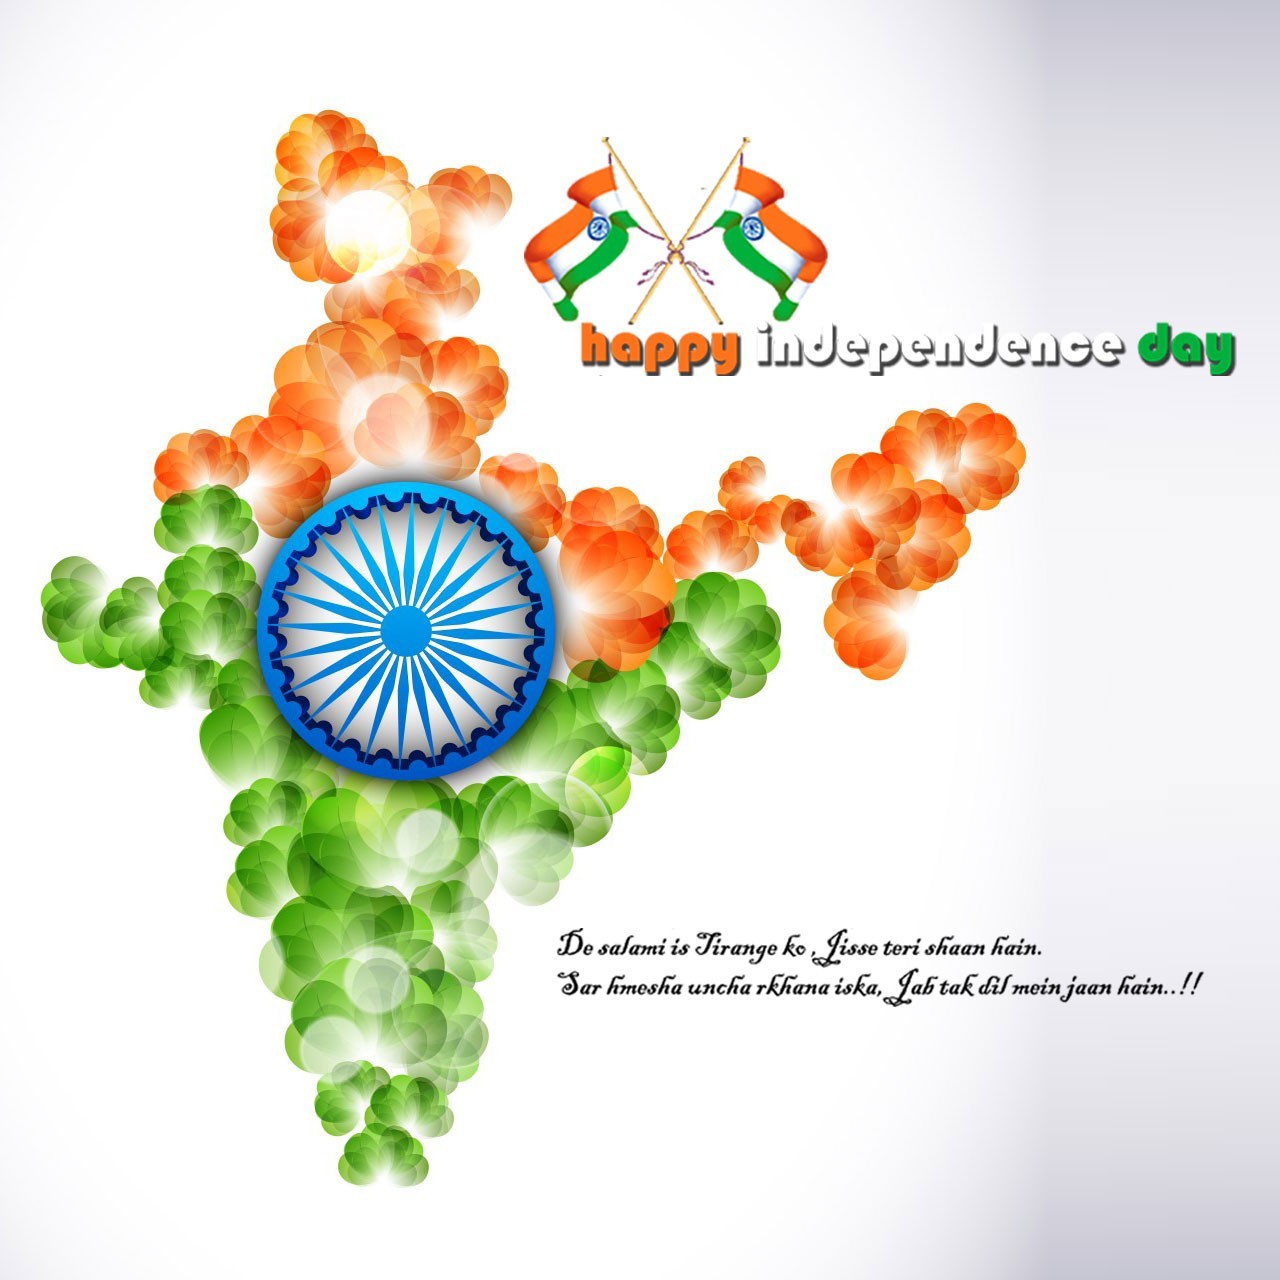 Best India Independence Day Wallpapers August 15 Desktop Fb Iphone